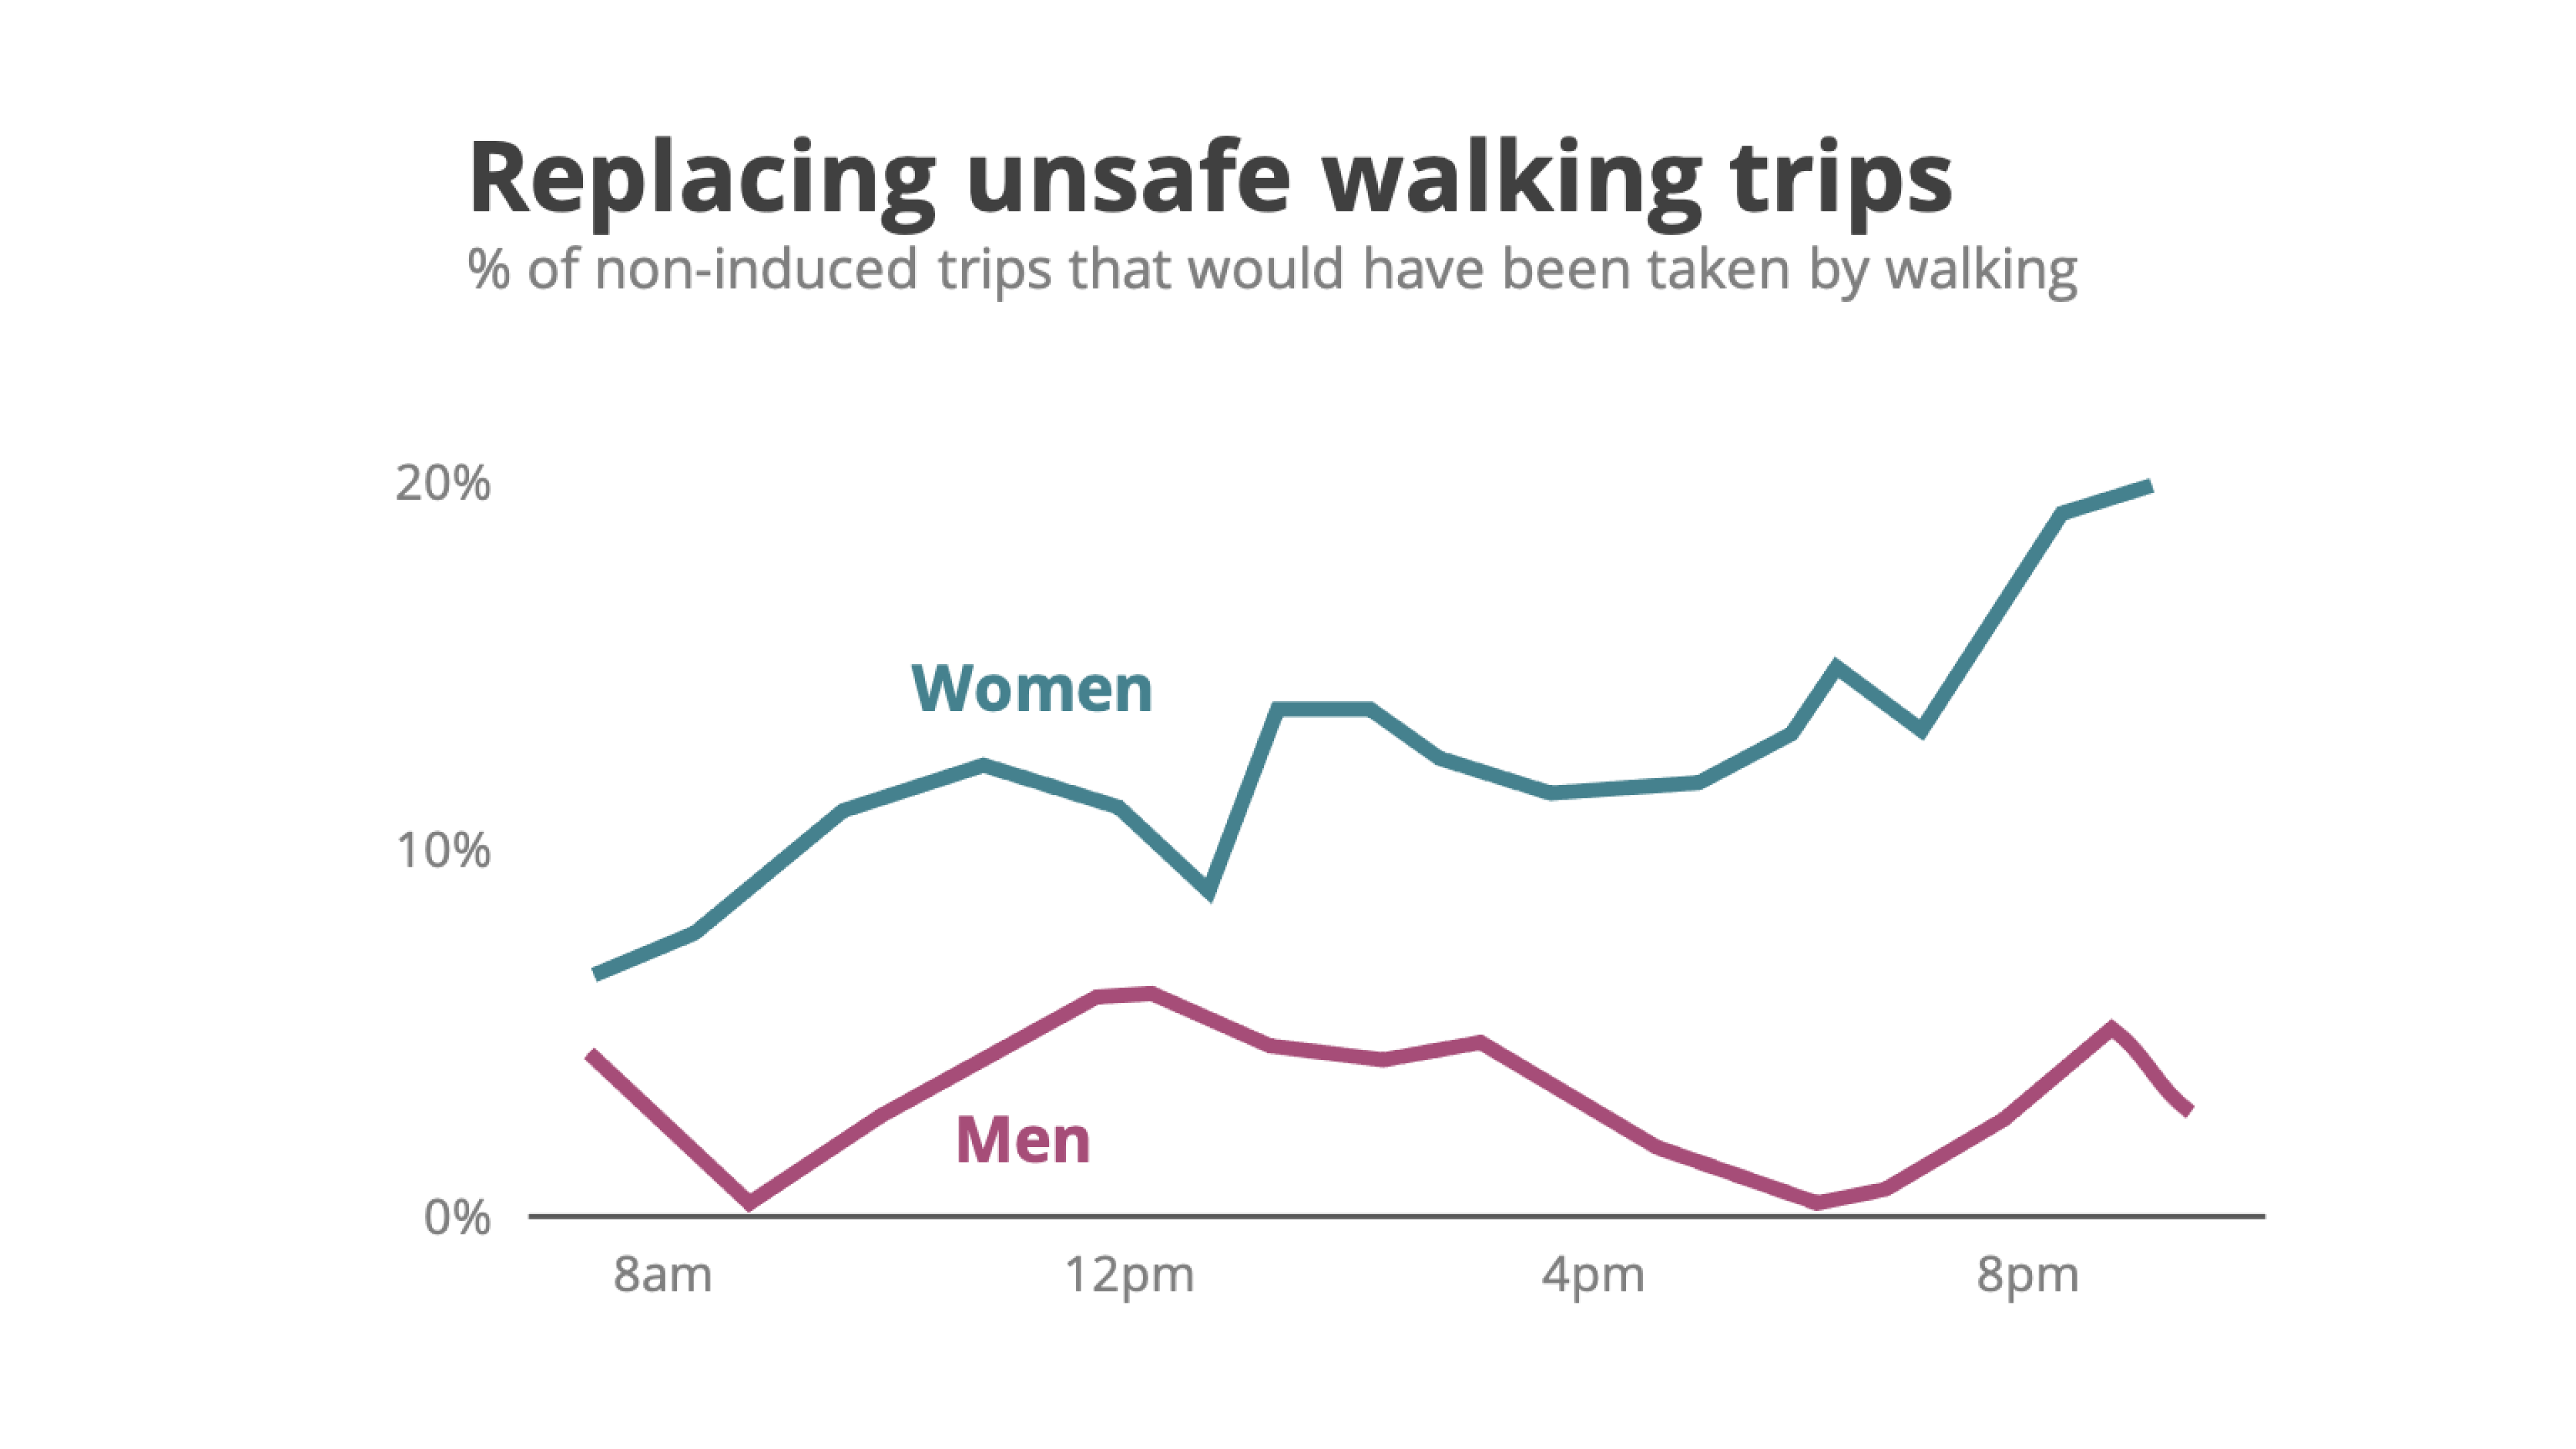 % of trips that would have been taken by walking